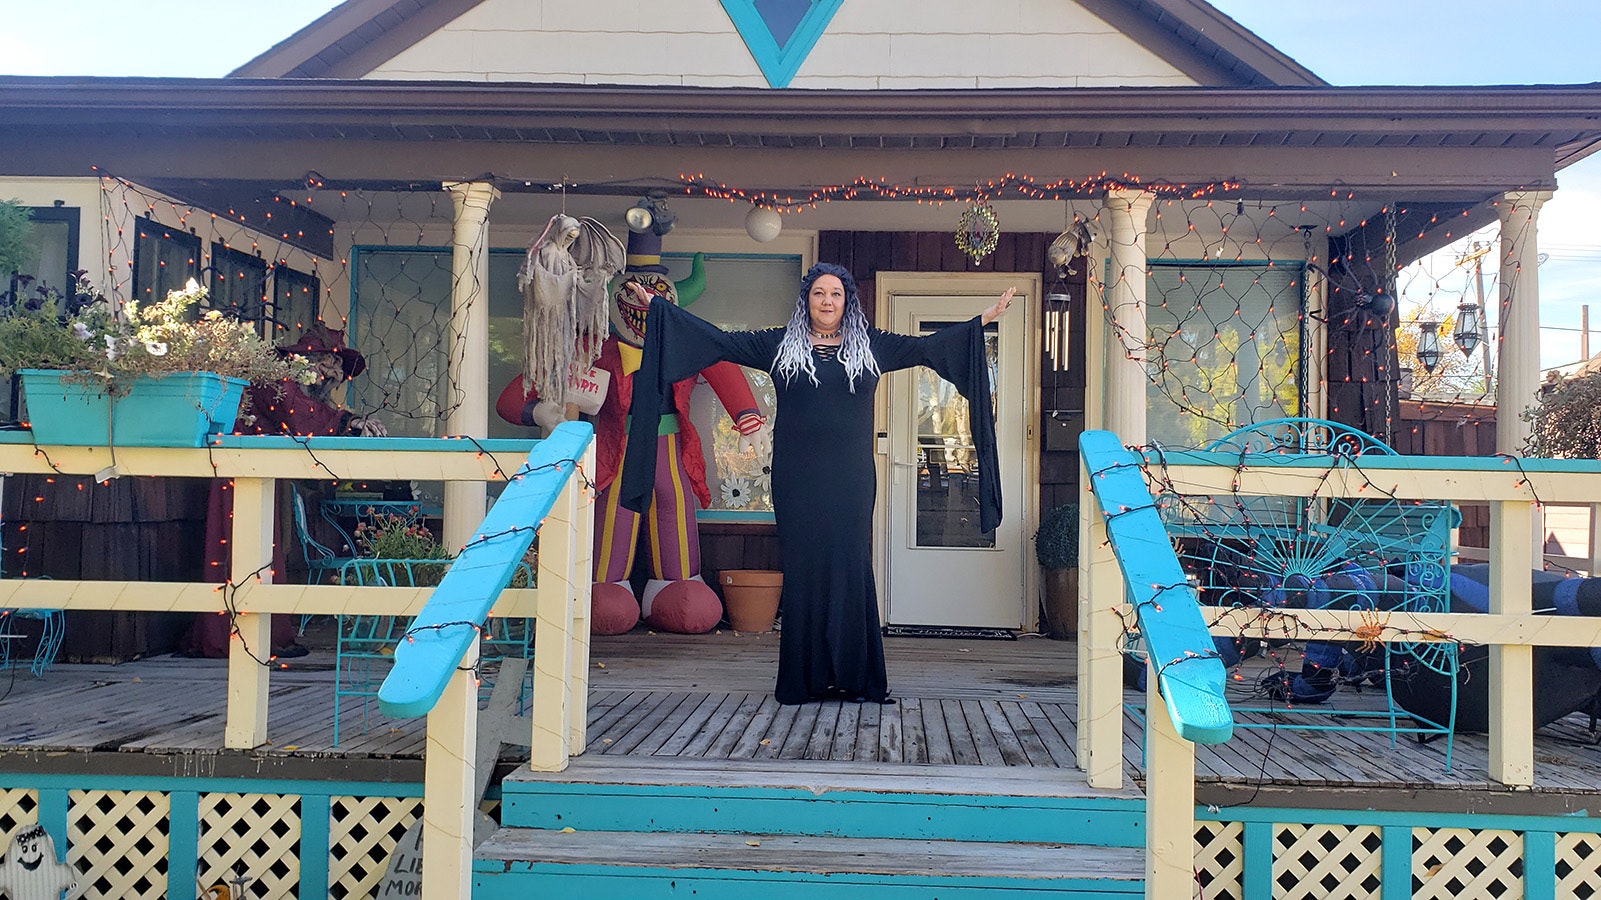 Desiree Ross at her home in Worland, which just happens to have been the town's first hospital. Ross is decorating the outside for Halloween this year, but in the future hopes to give haunted house tours during October.